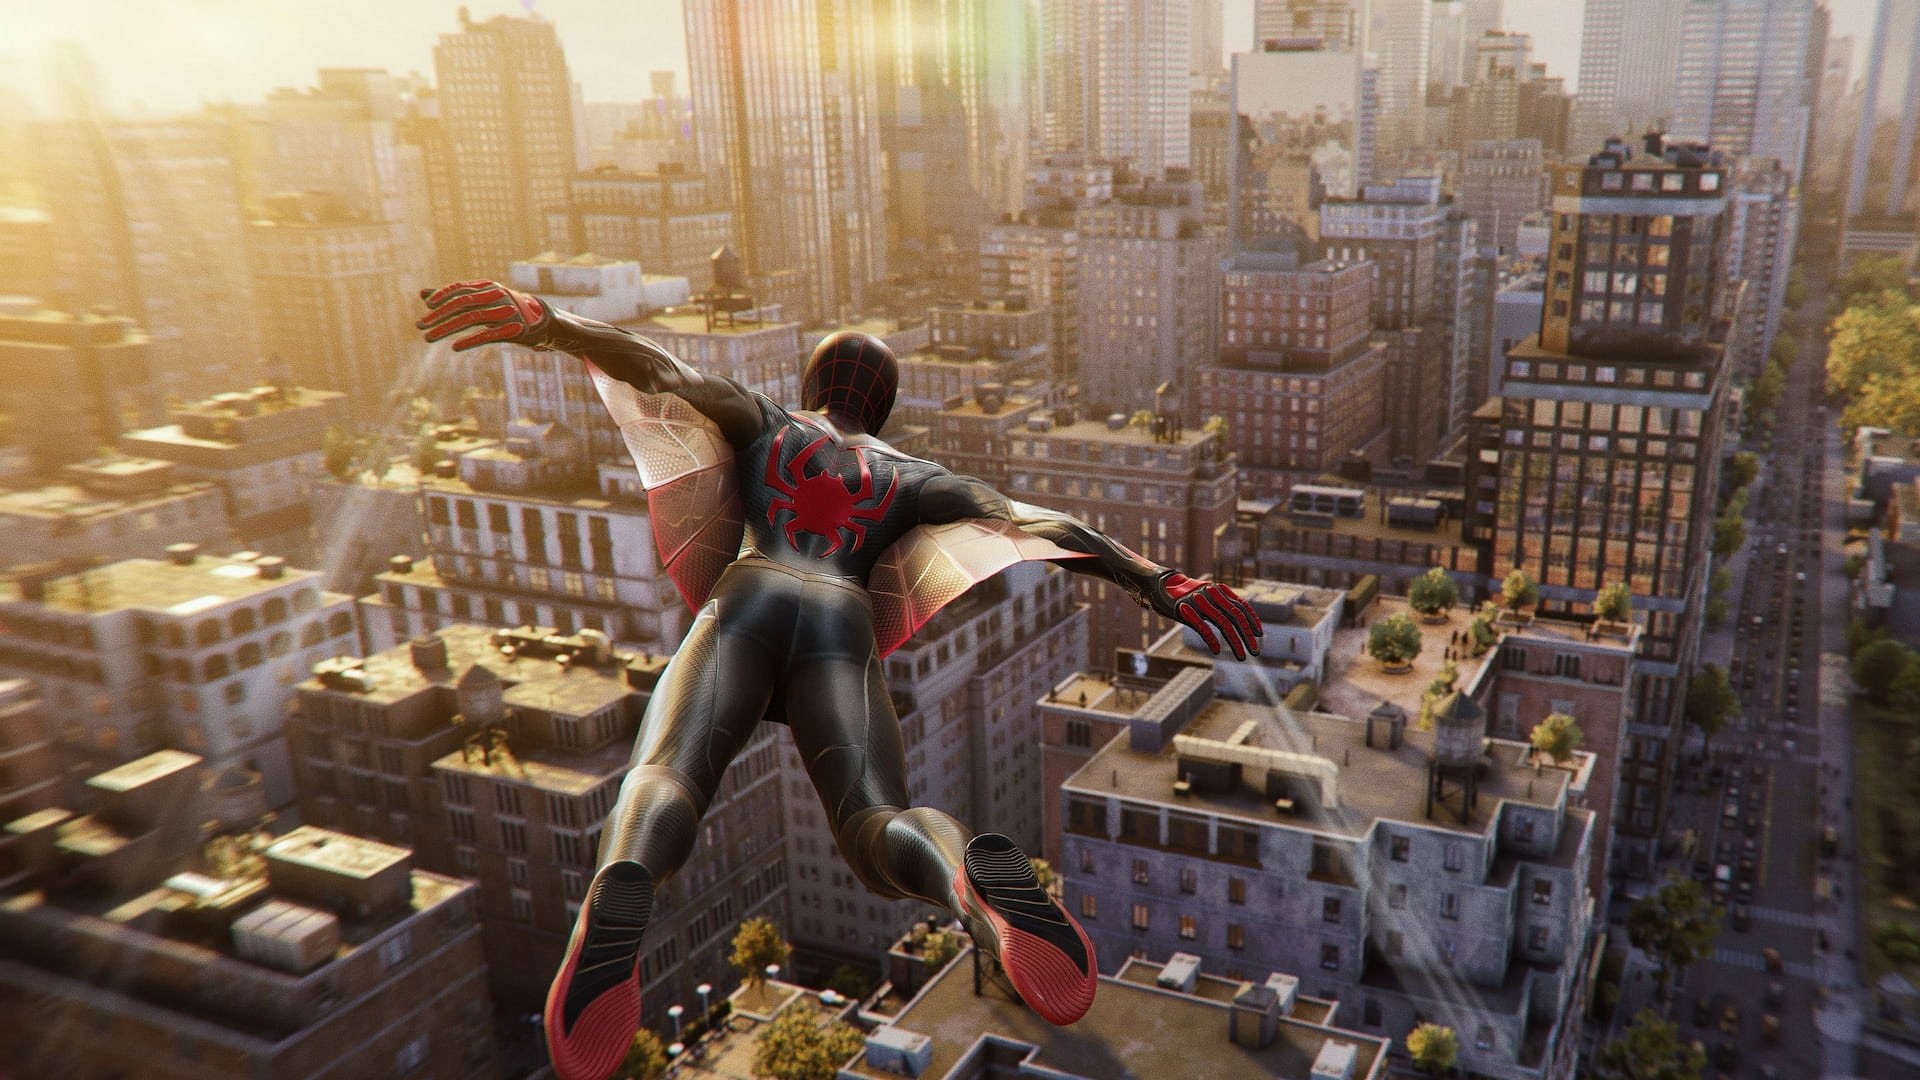 The New Game Plus mode for Spider-Man 2 is being delayed until early  2024. Gaming news - eSports events review, analytics, announcements,  interviews, statistics - P-ovmDv4d